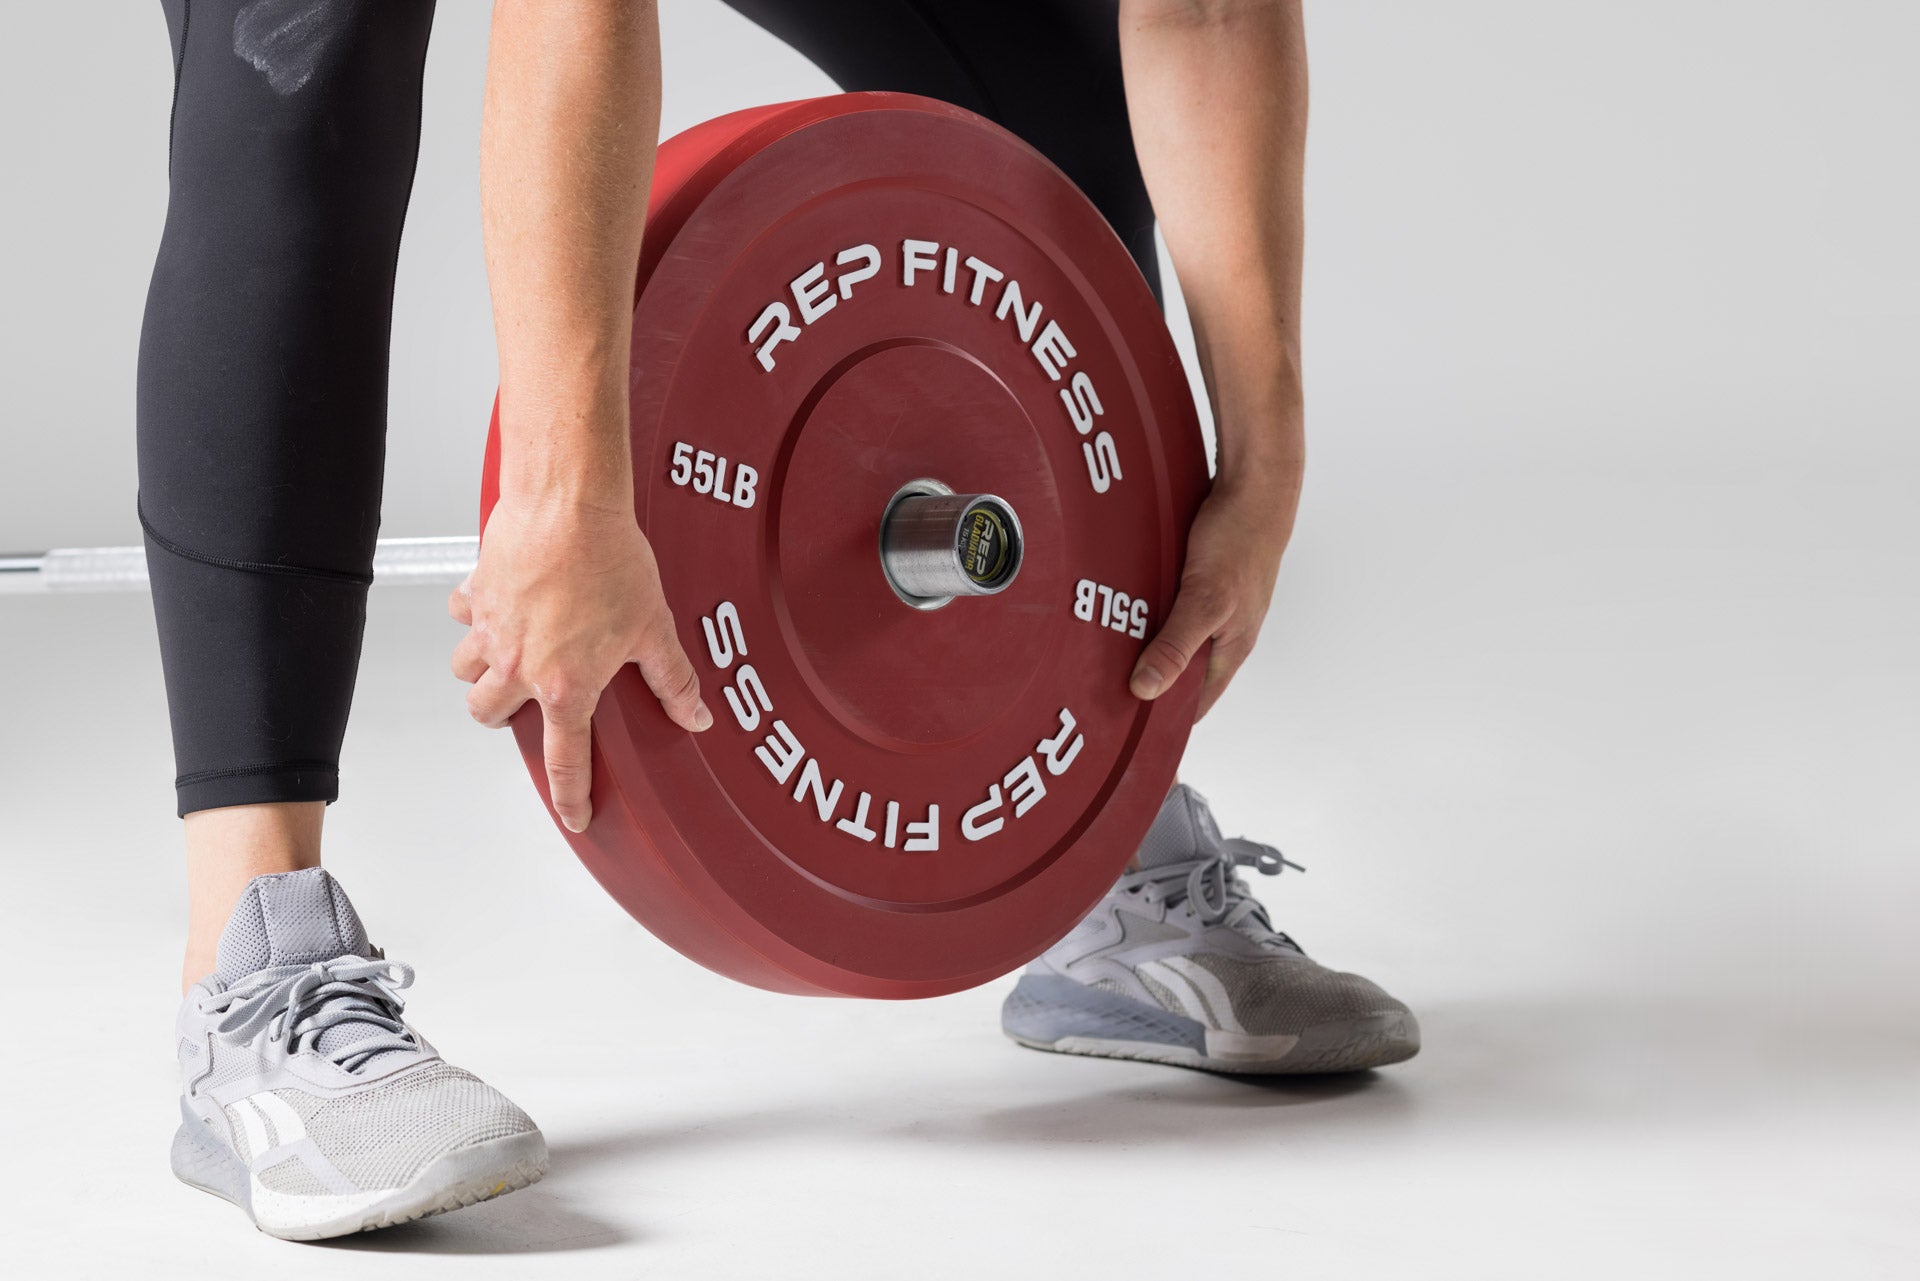 Close-up view of a lifter loading a red 55lb colored bumper plate onto a barbell on the floor.